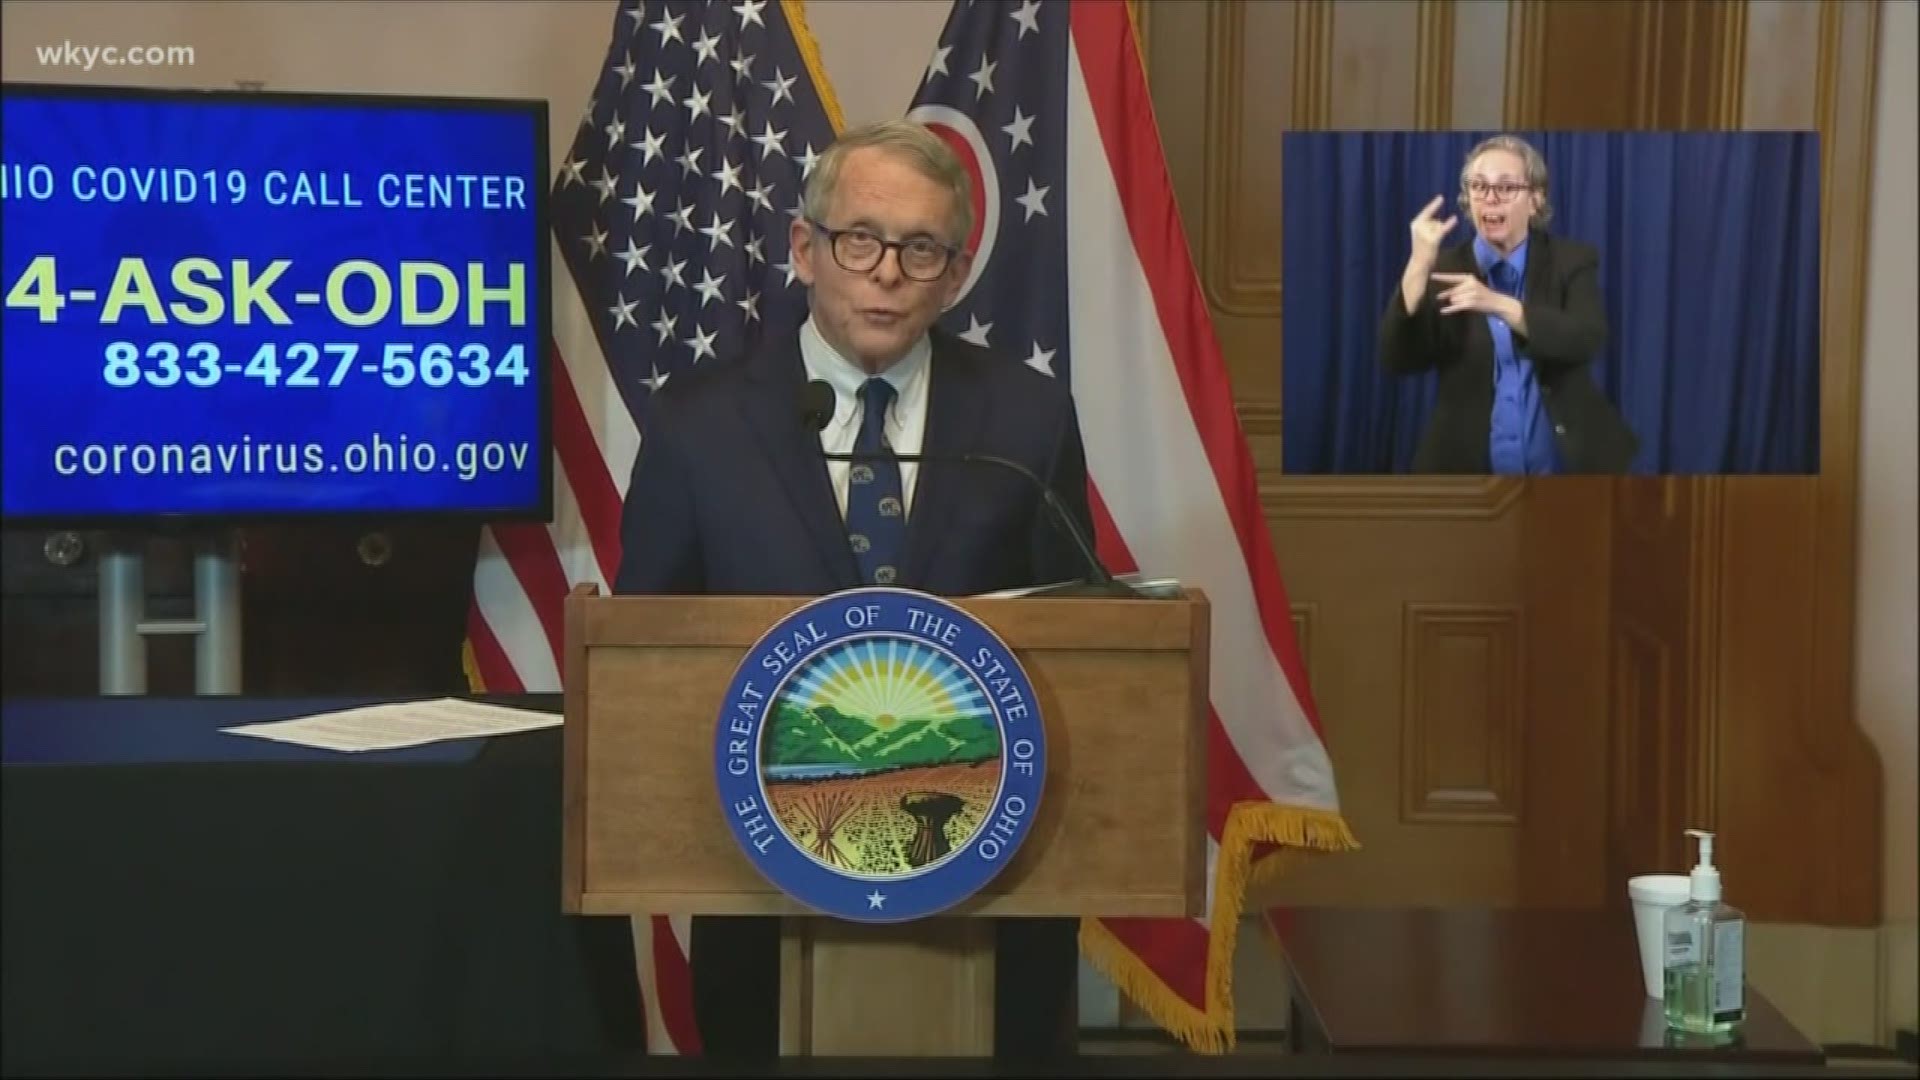 DeWine is loosening restrictions on alcoholic drinks with takeout orders, and is also looking at releasing dozens of prisoners. Laura Caso reports.